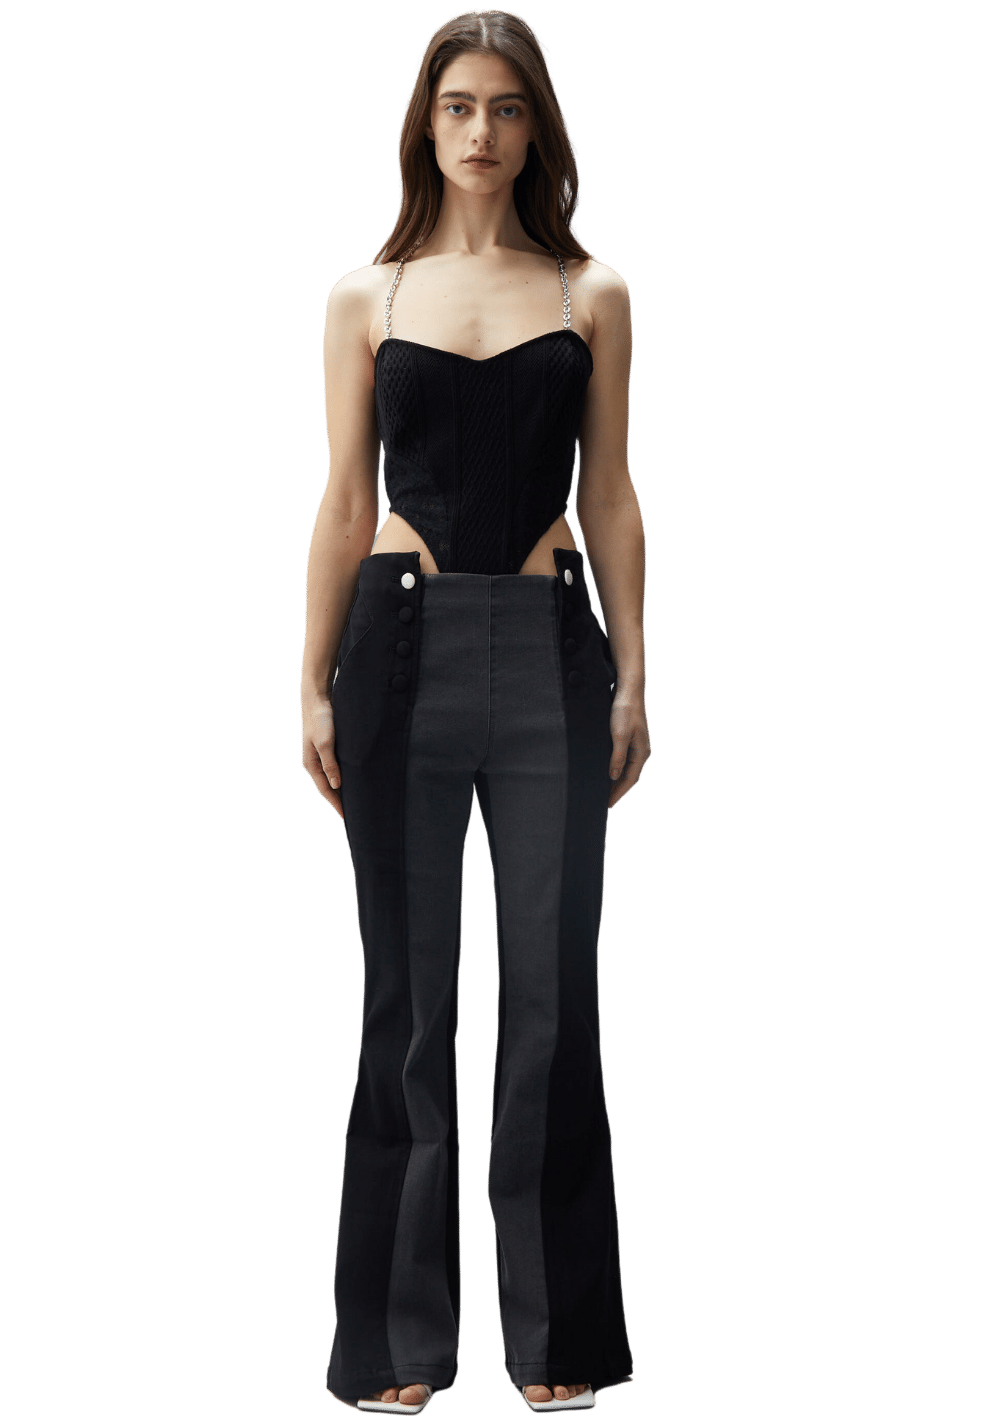 Two Tone Skinny Flared Jeans - PSYLOS 1, Two Tone Skinny Flared Jeans, Pants, Necessary, PSYLOS 1